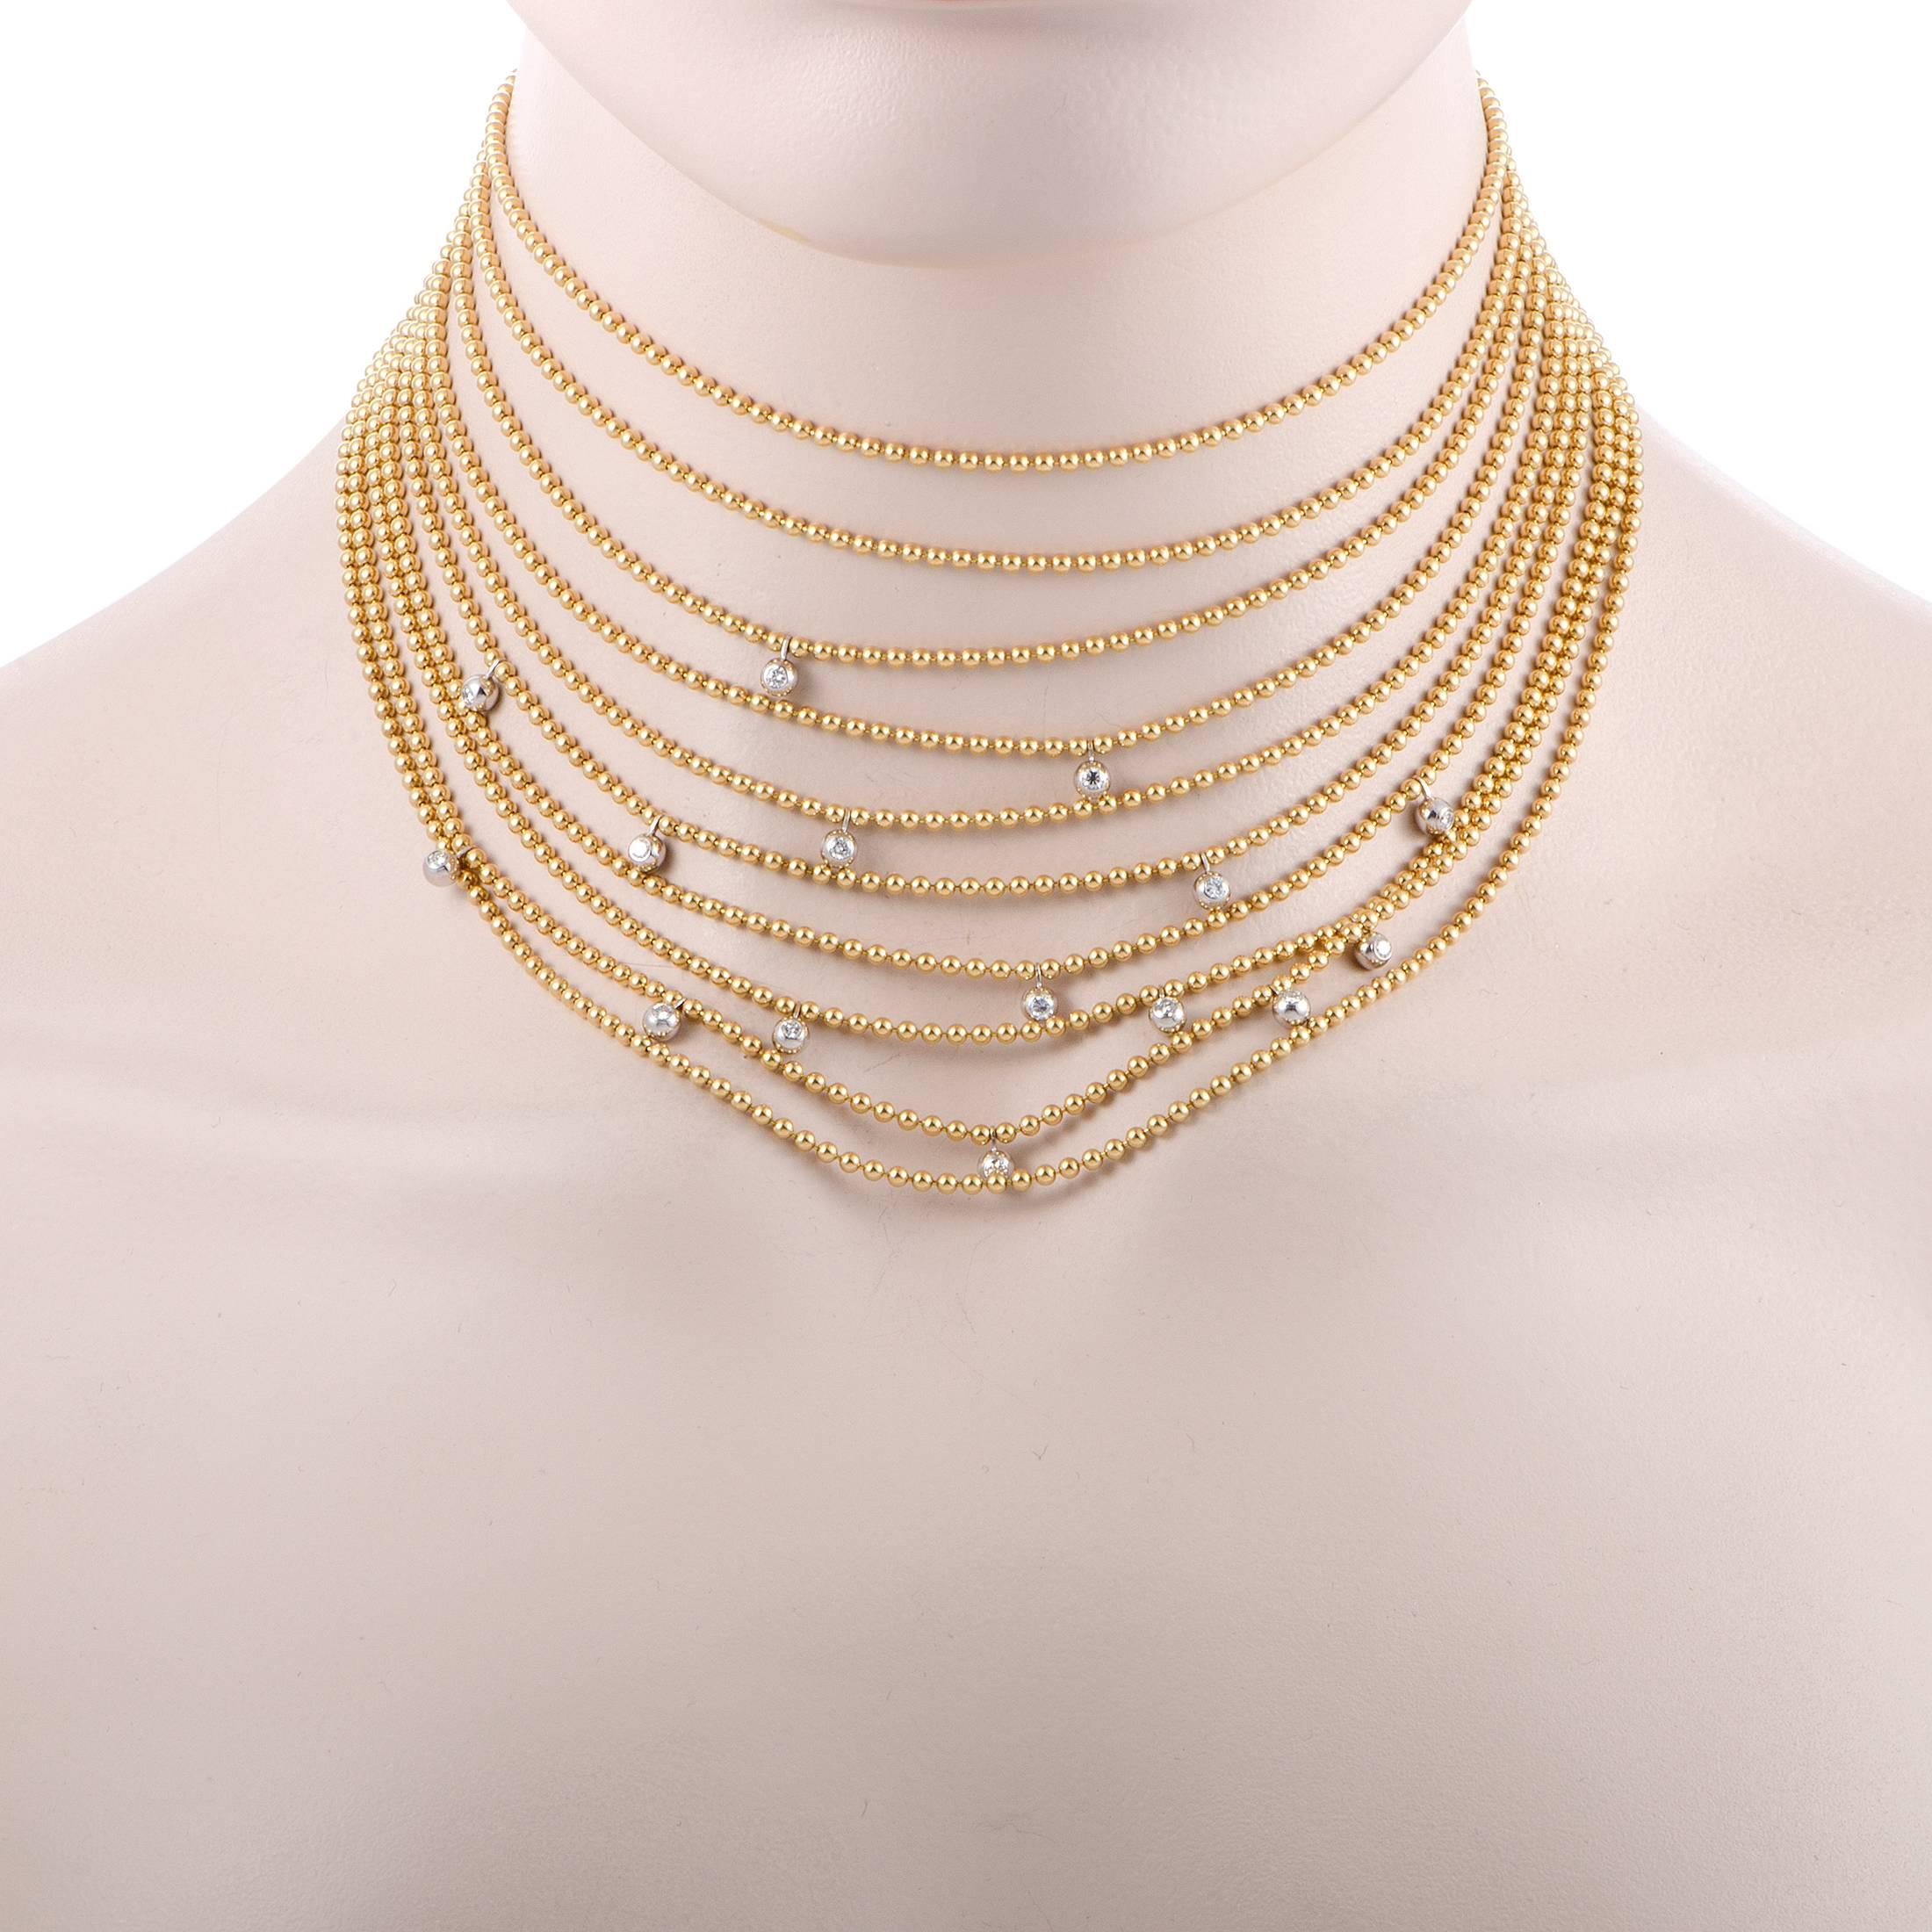 This incredibly luxurious necklace designed by Cartier is comprised of numerous beaded strings that create an exceptionally elegant appearance. The necklace is made of alluring 18K yellow gold, with its warm sheen accompanied by the cool glisten of